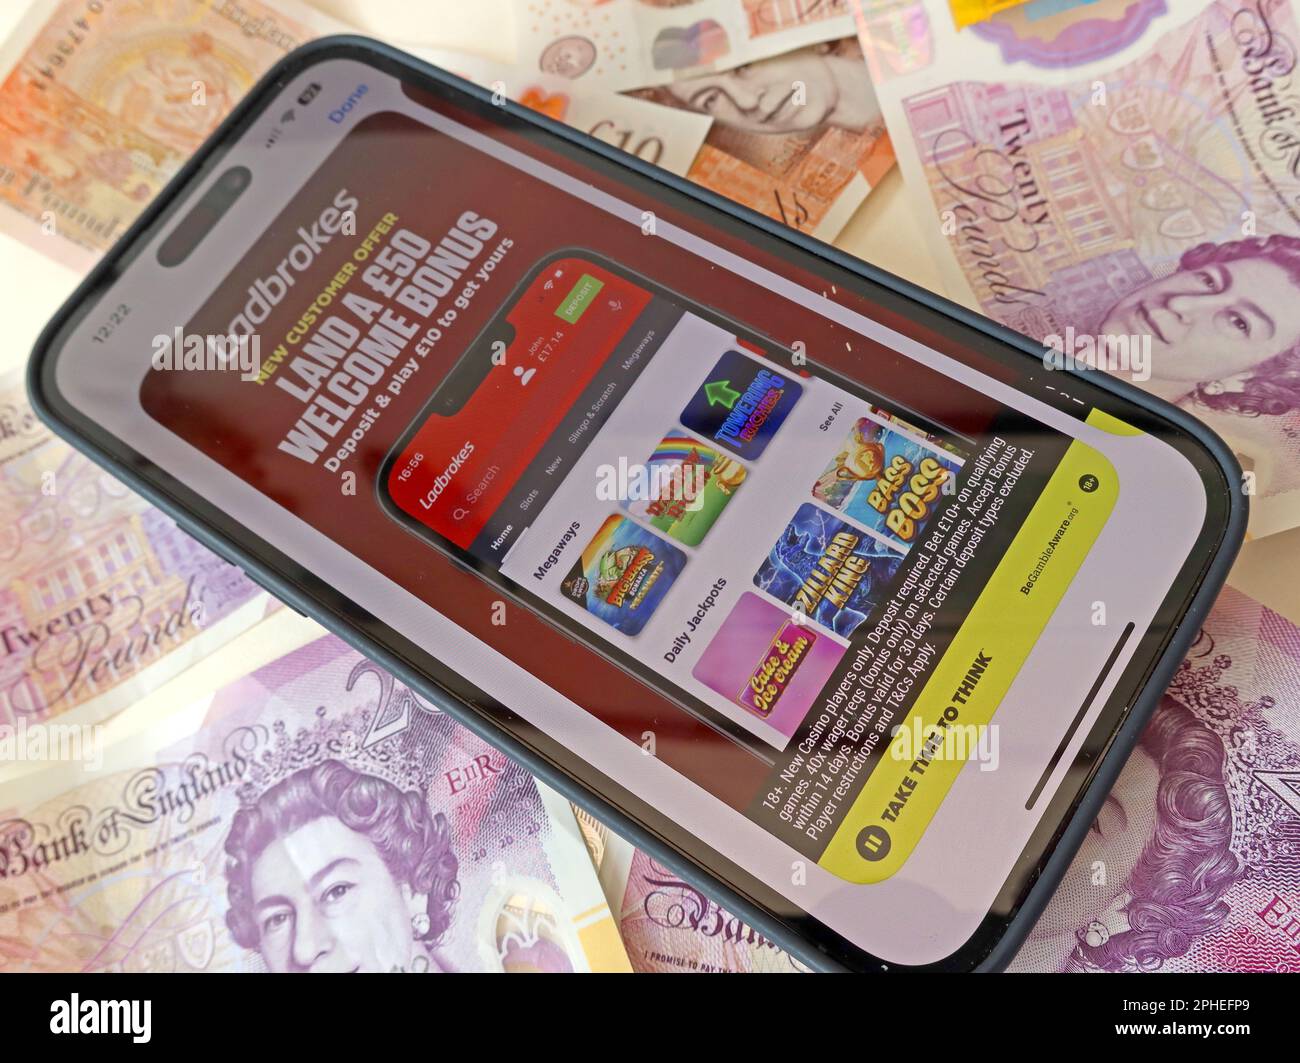 Ladbrokes Smartphone App - Online and smartphone casino, slots and gambling app with English Sterling notes, money easily lost - BeGambleAware Stock Photo